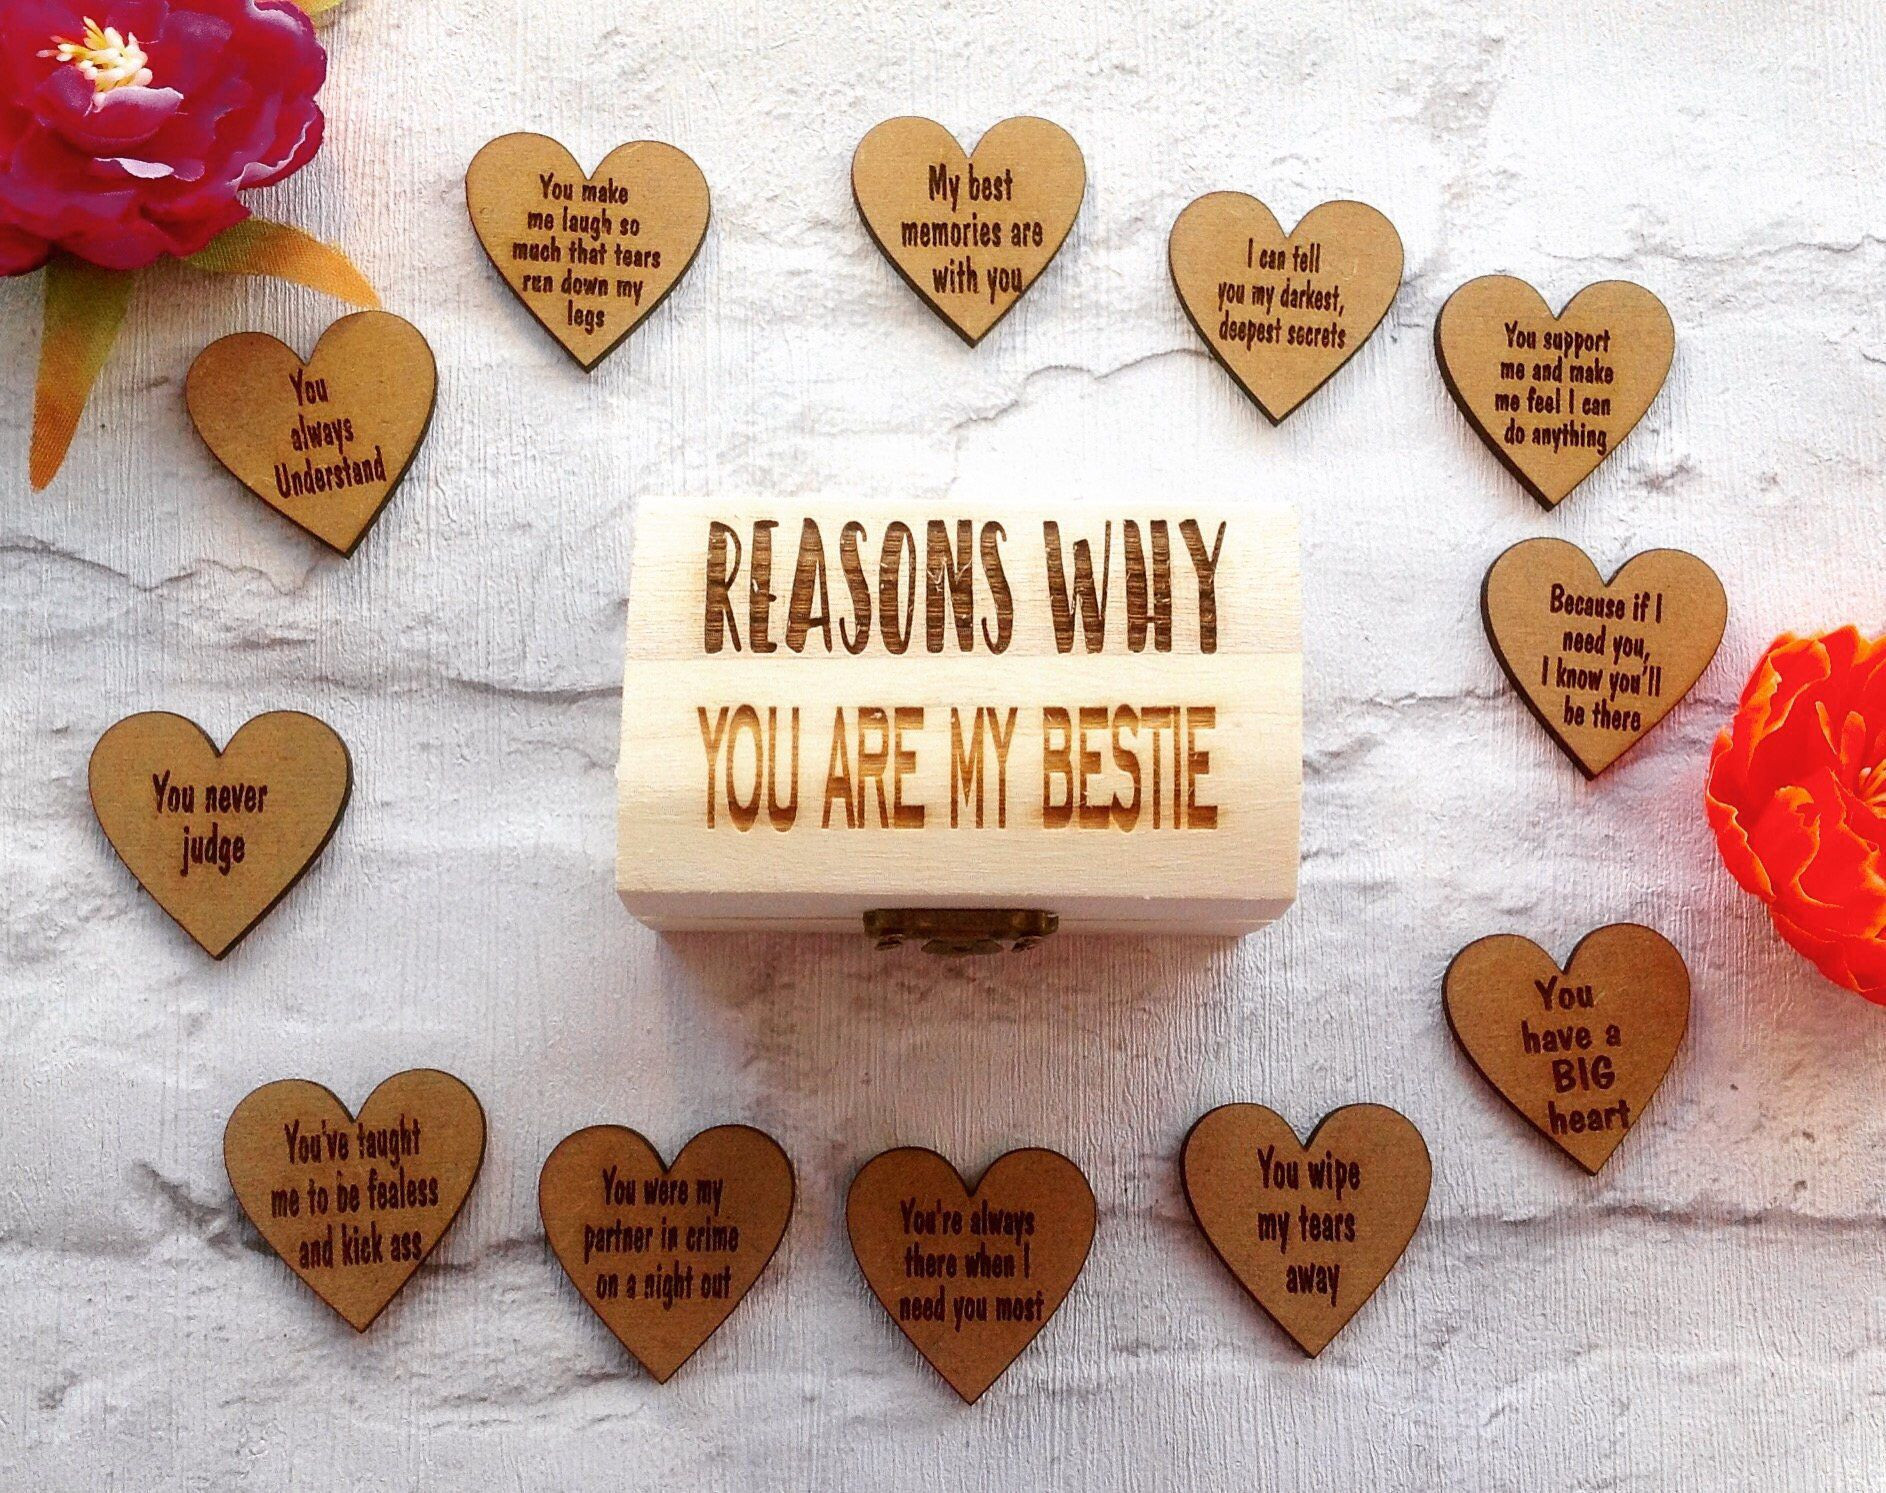 Will You Be My Valentine Gift Ideas
 Reasons why you are my bestie personalised keepsake